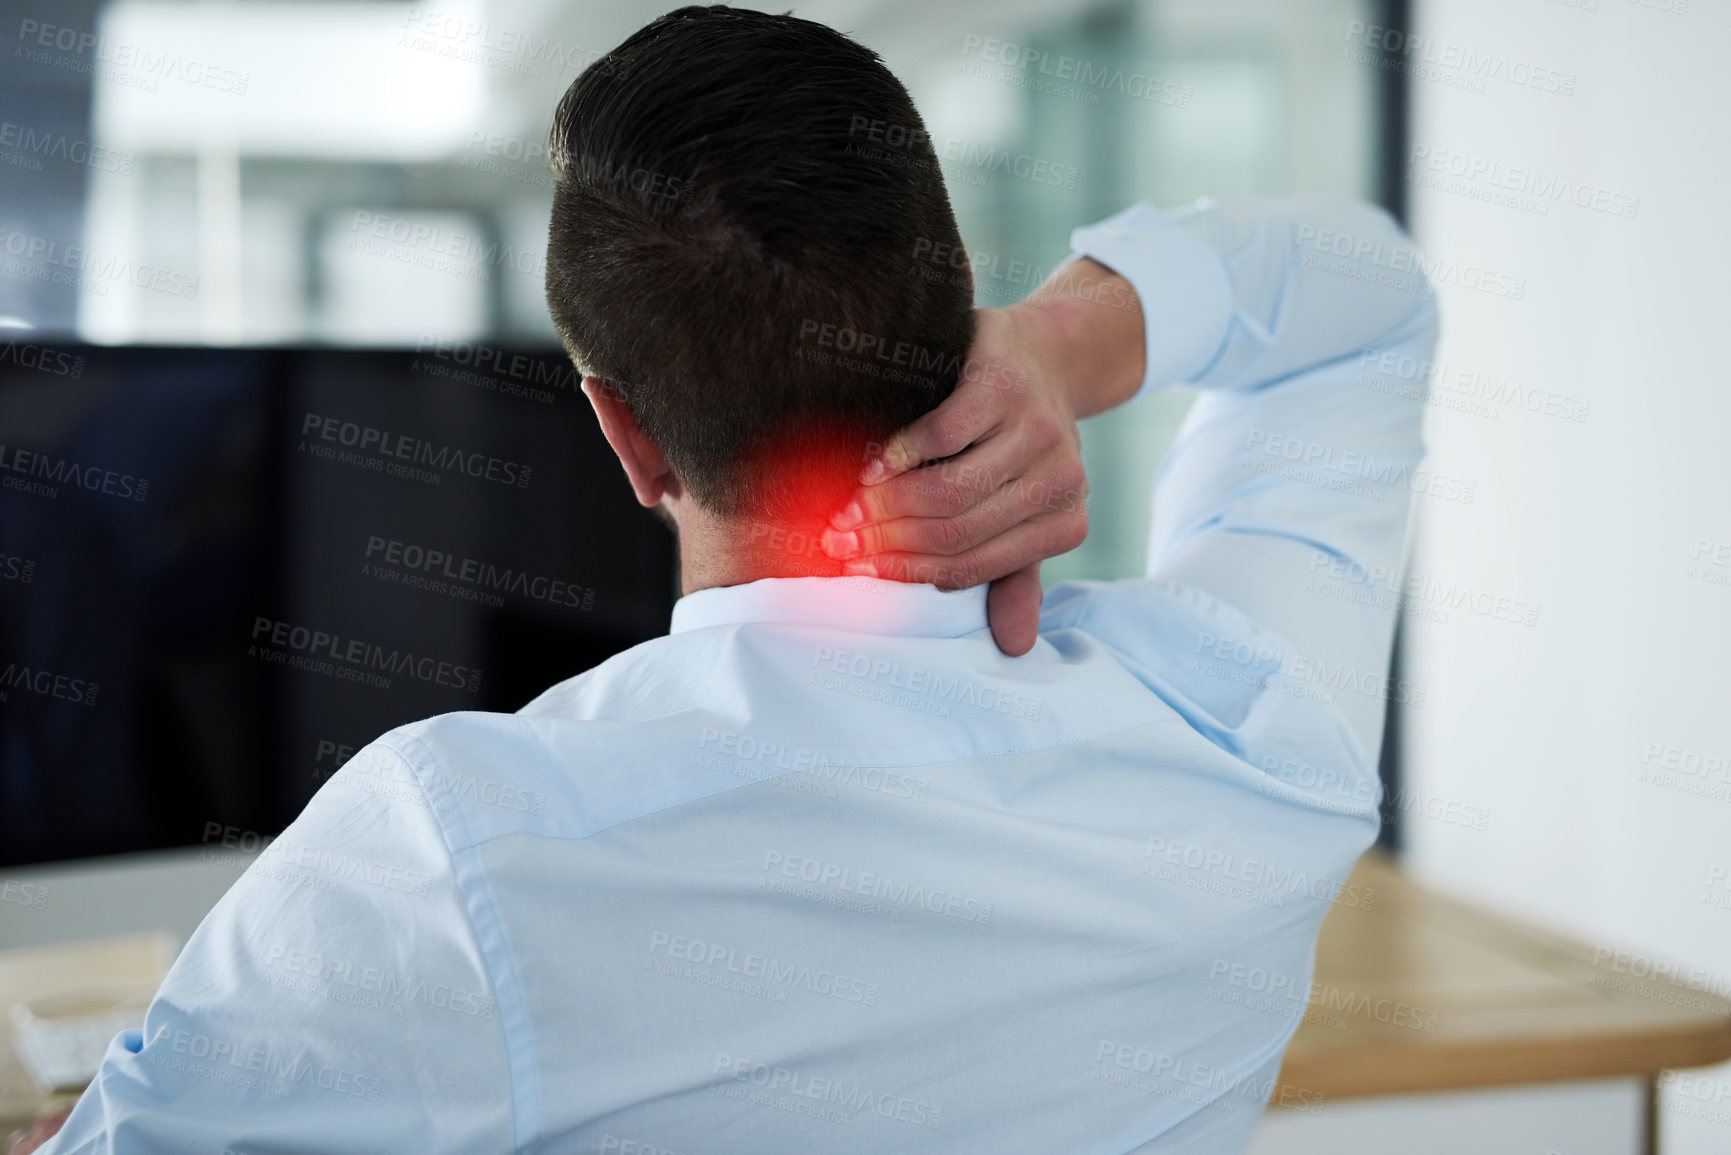 Buy stock photo Rearview shot of a young businessman experiencing neck pain highlighted in glowing red at work